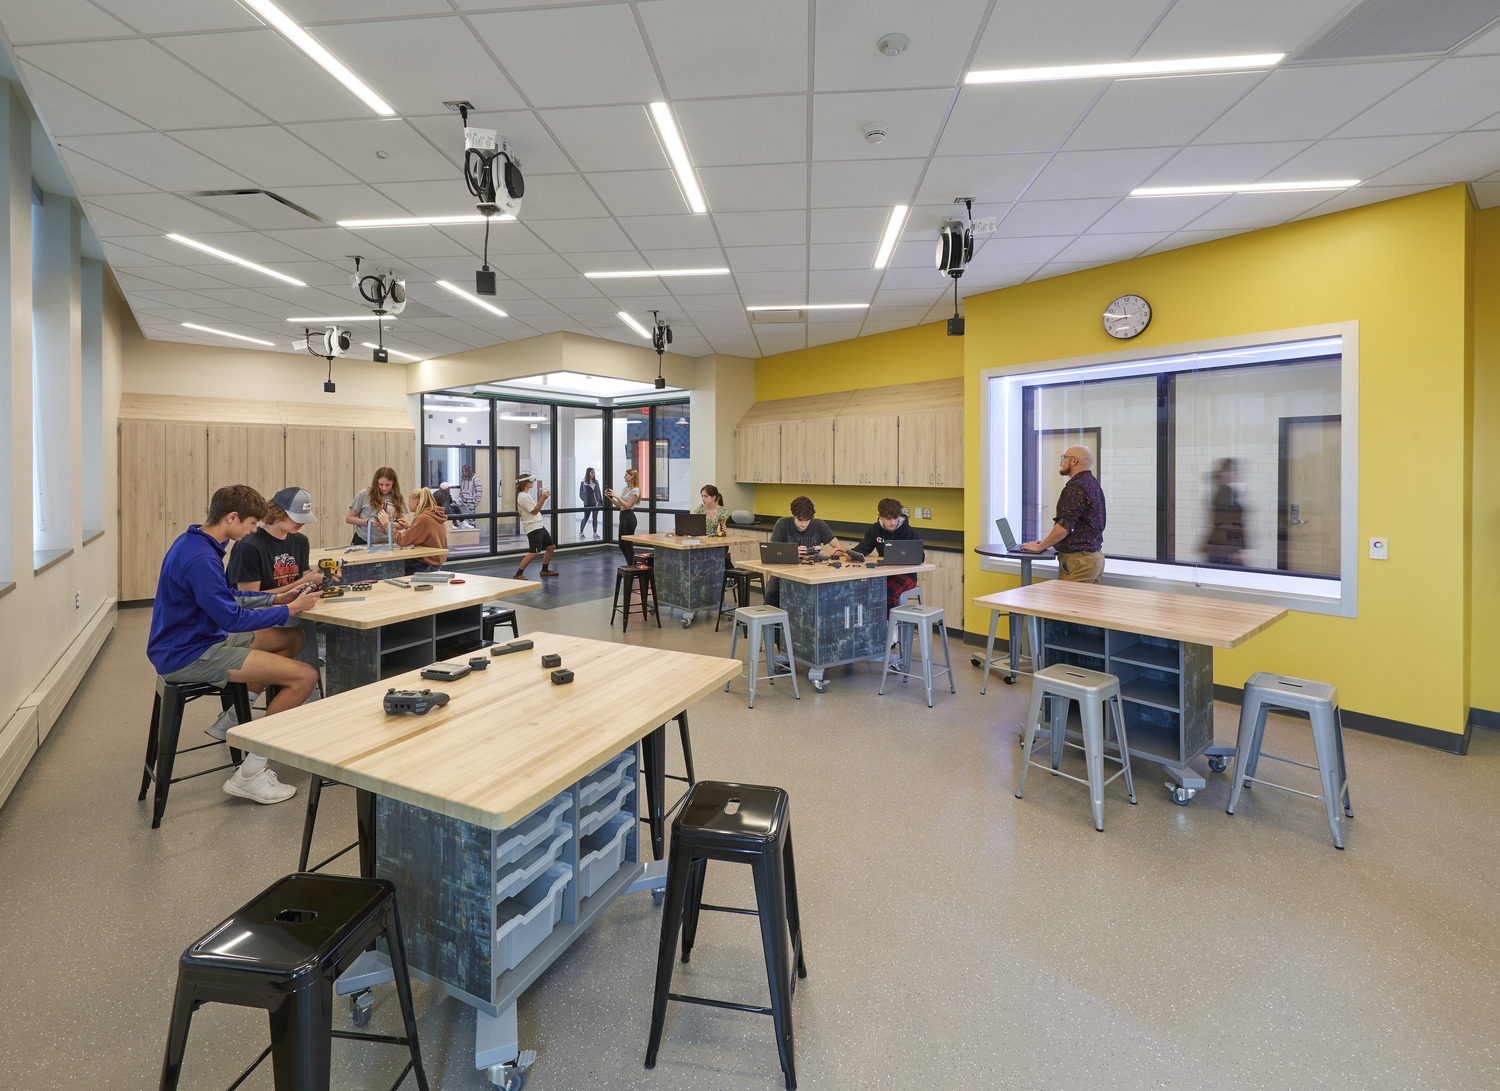 Image shows York Central School District STEAM learning wing